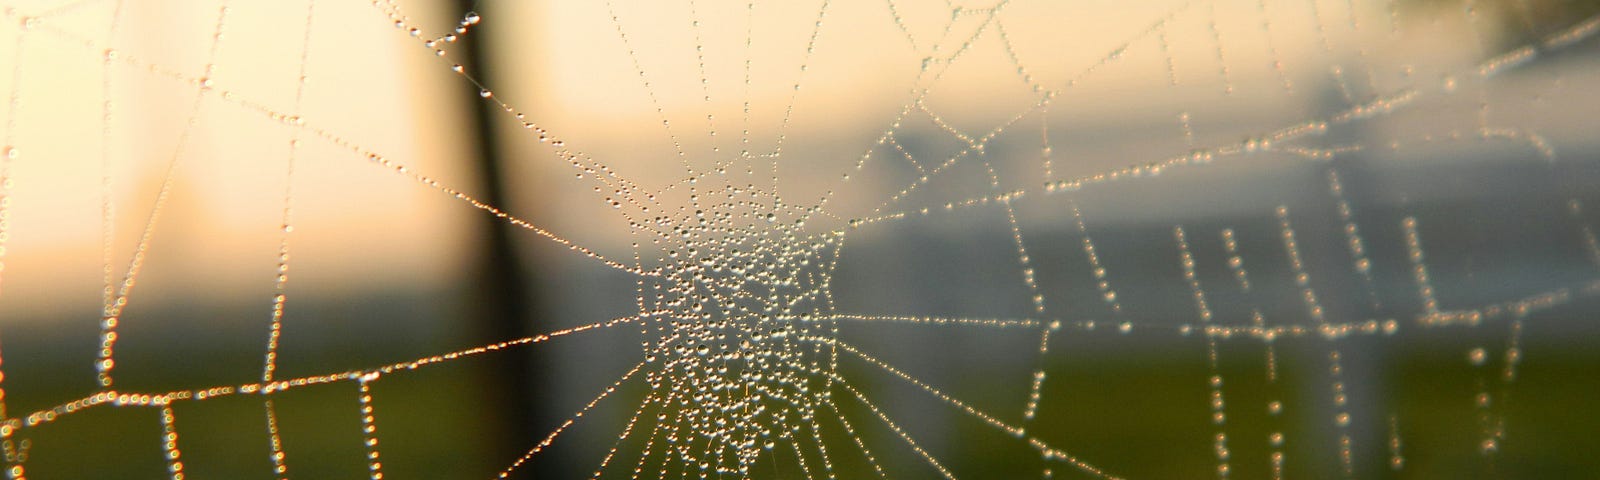 A delicate spider web decorated with drops of dew shines in the early morning sunlight.